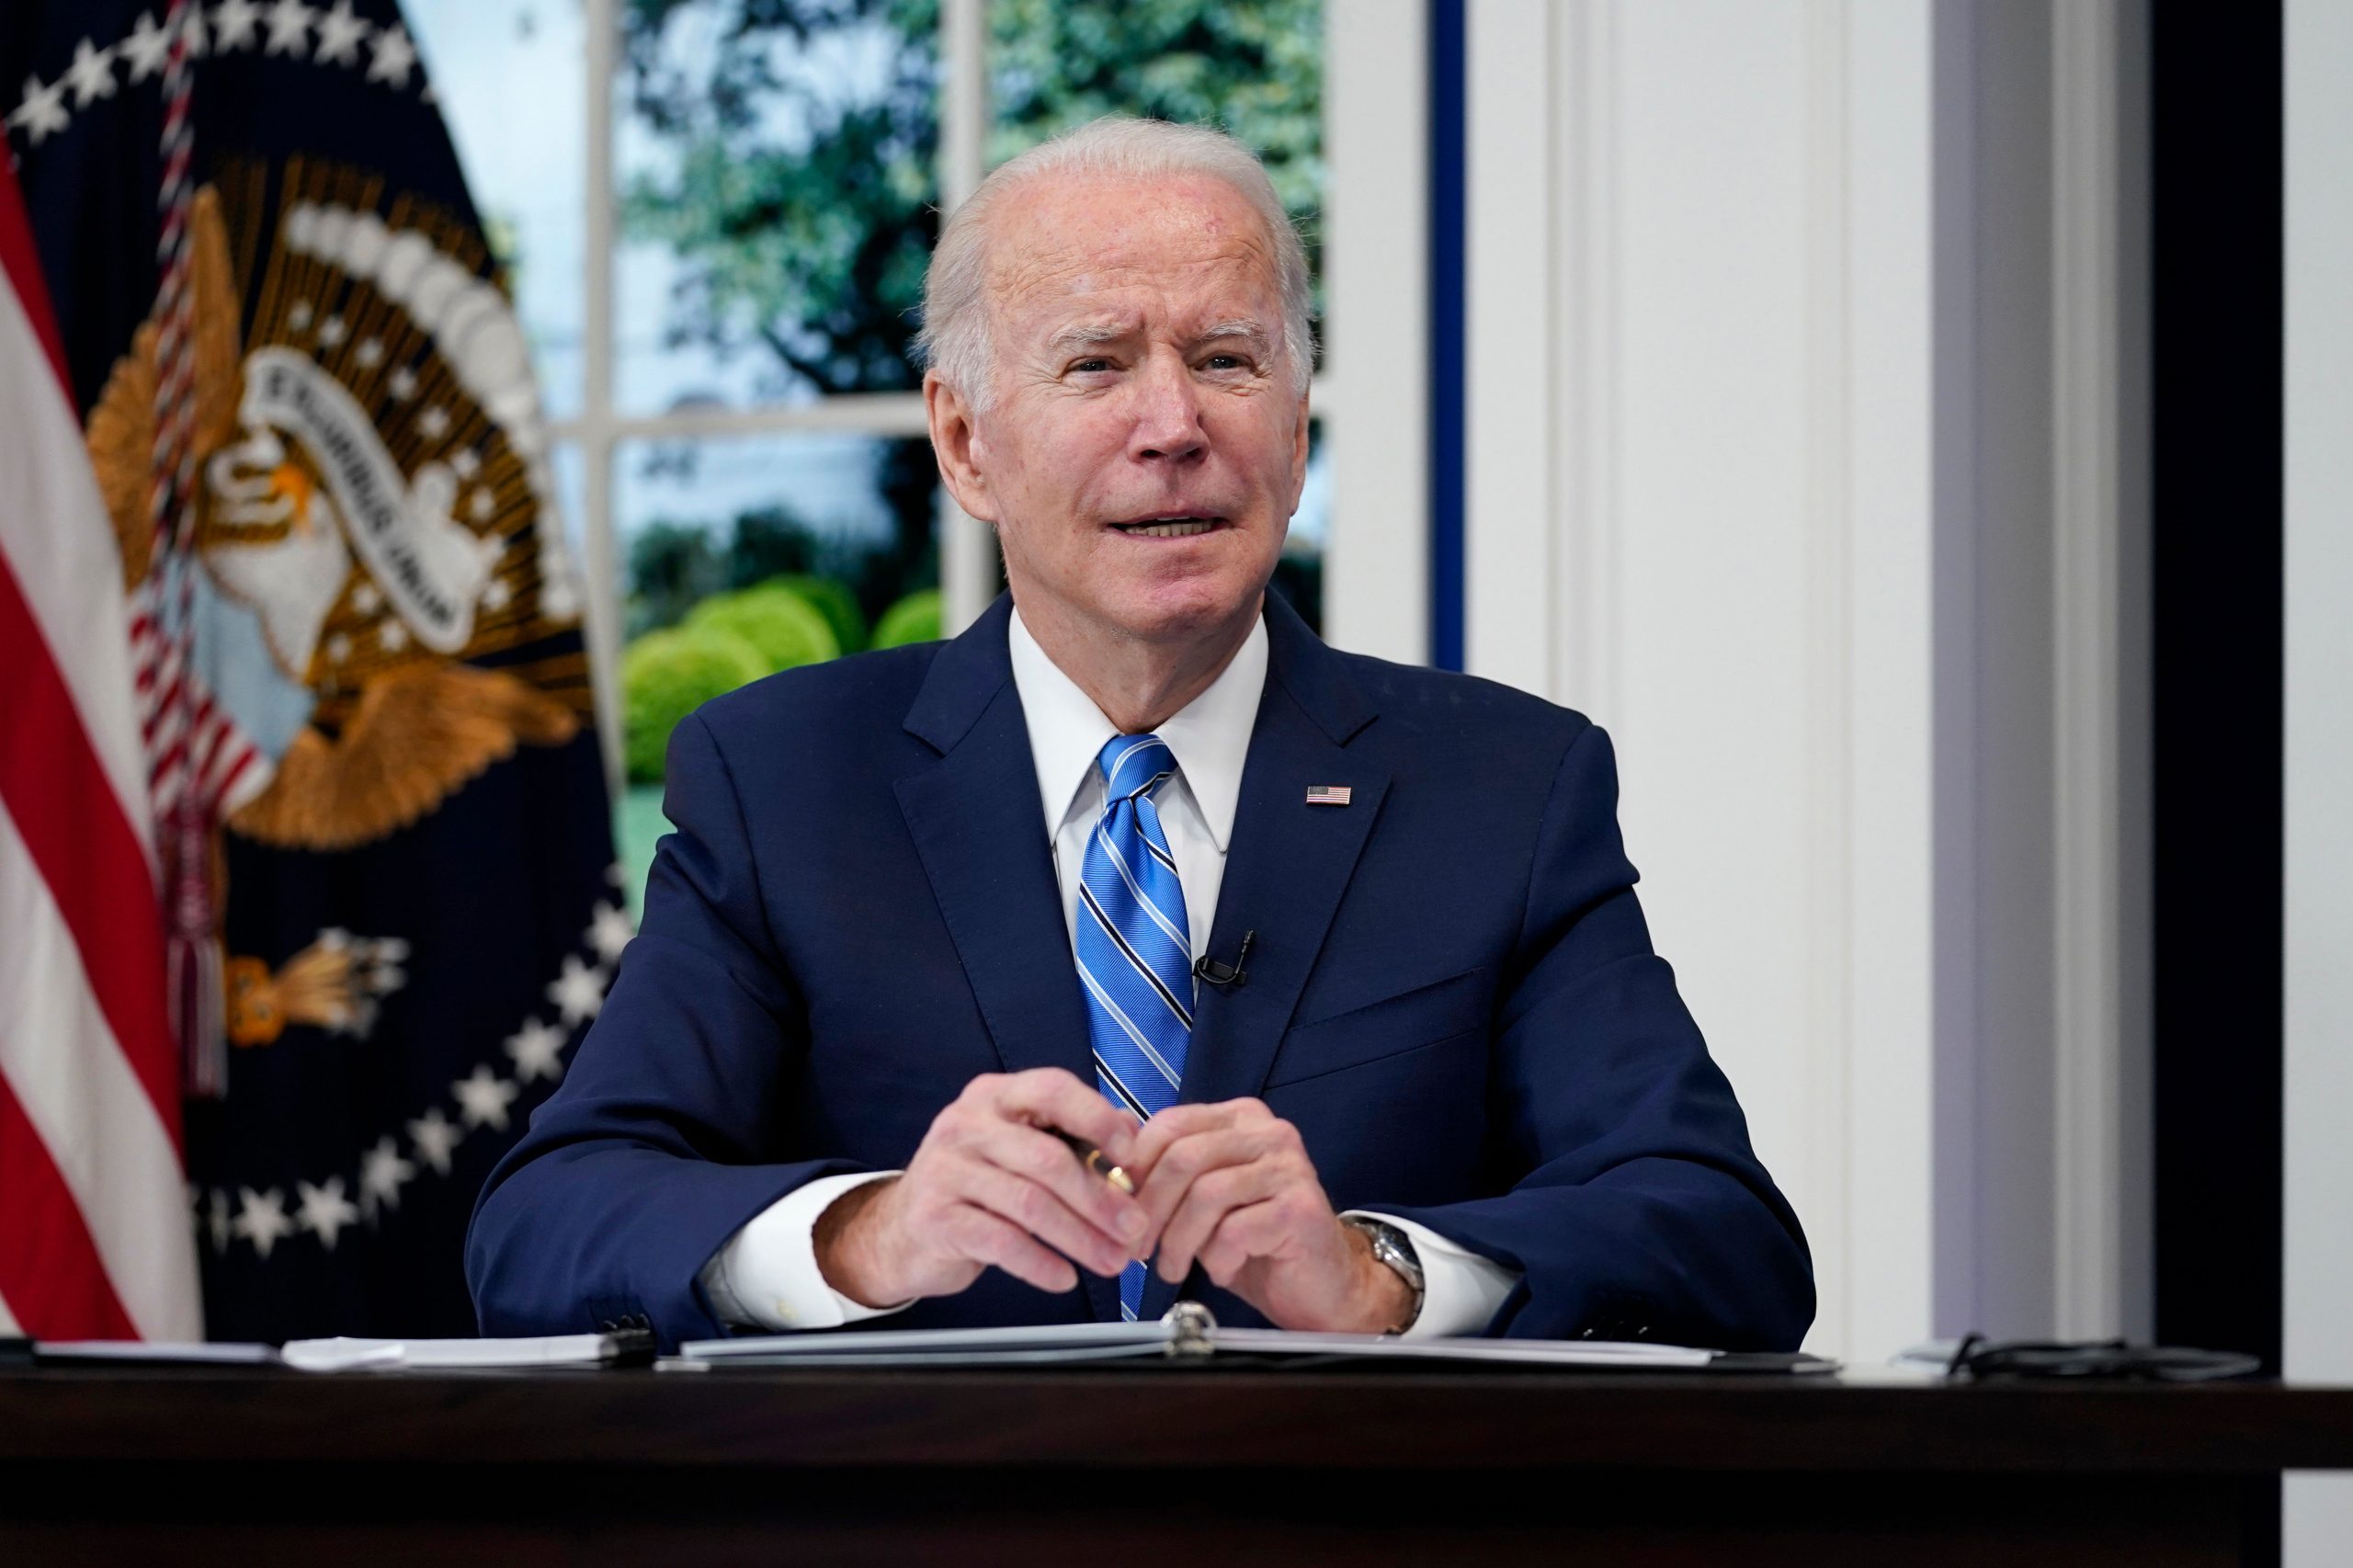 January 6 Capitol attack: All you need to know about Joe Biden’s speech